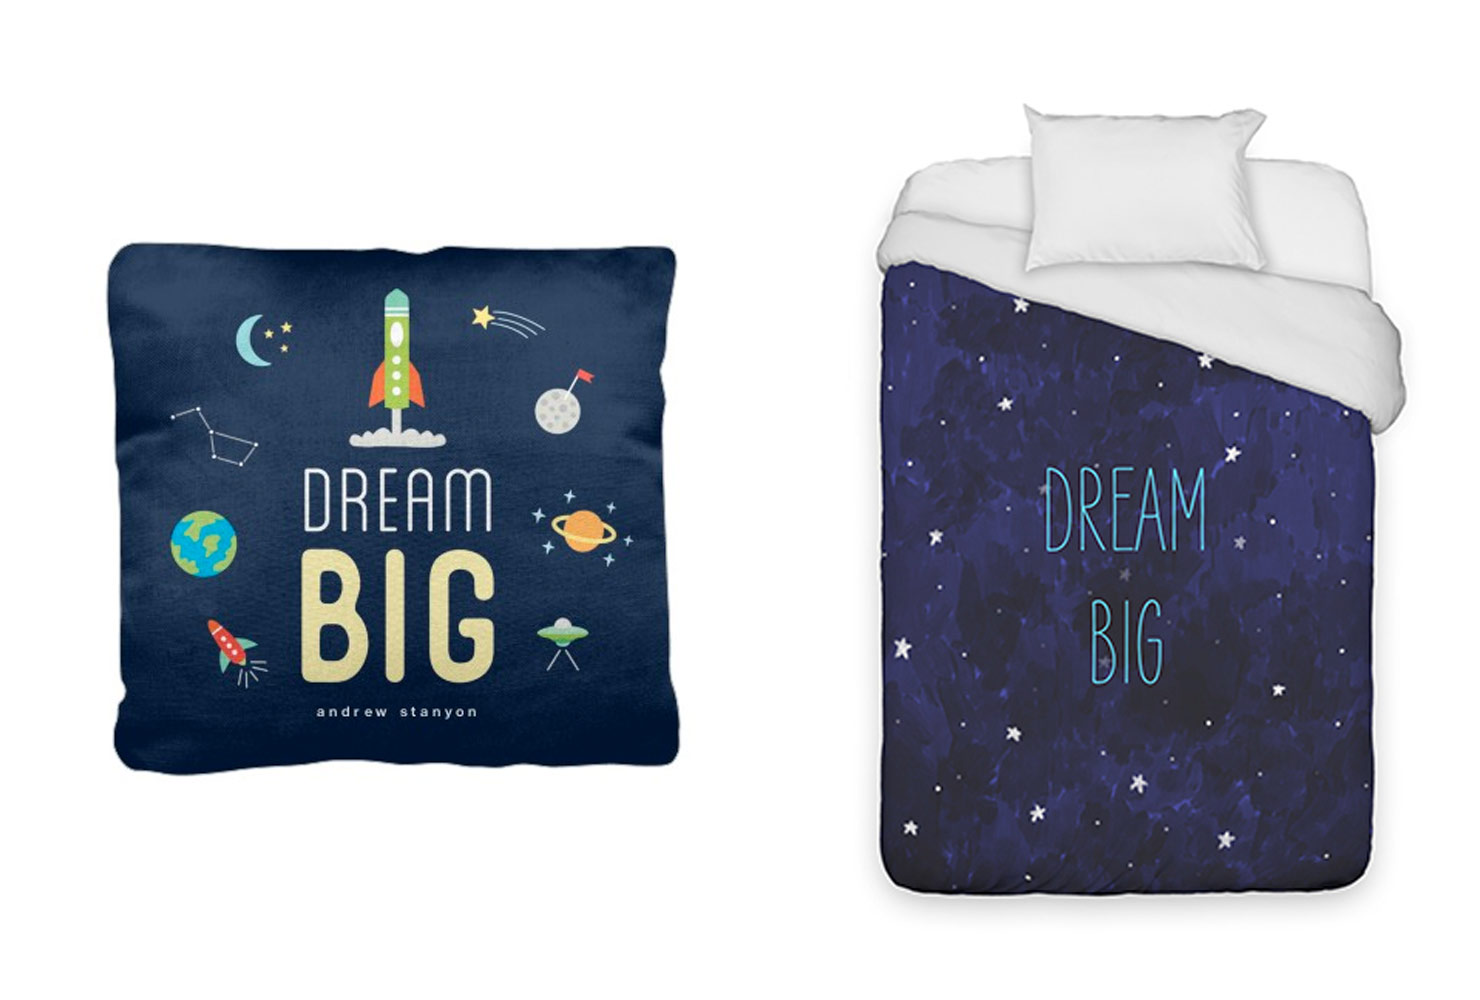 Dream big bedding and pillow.